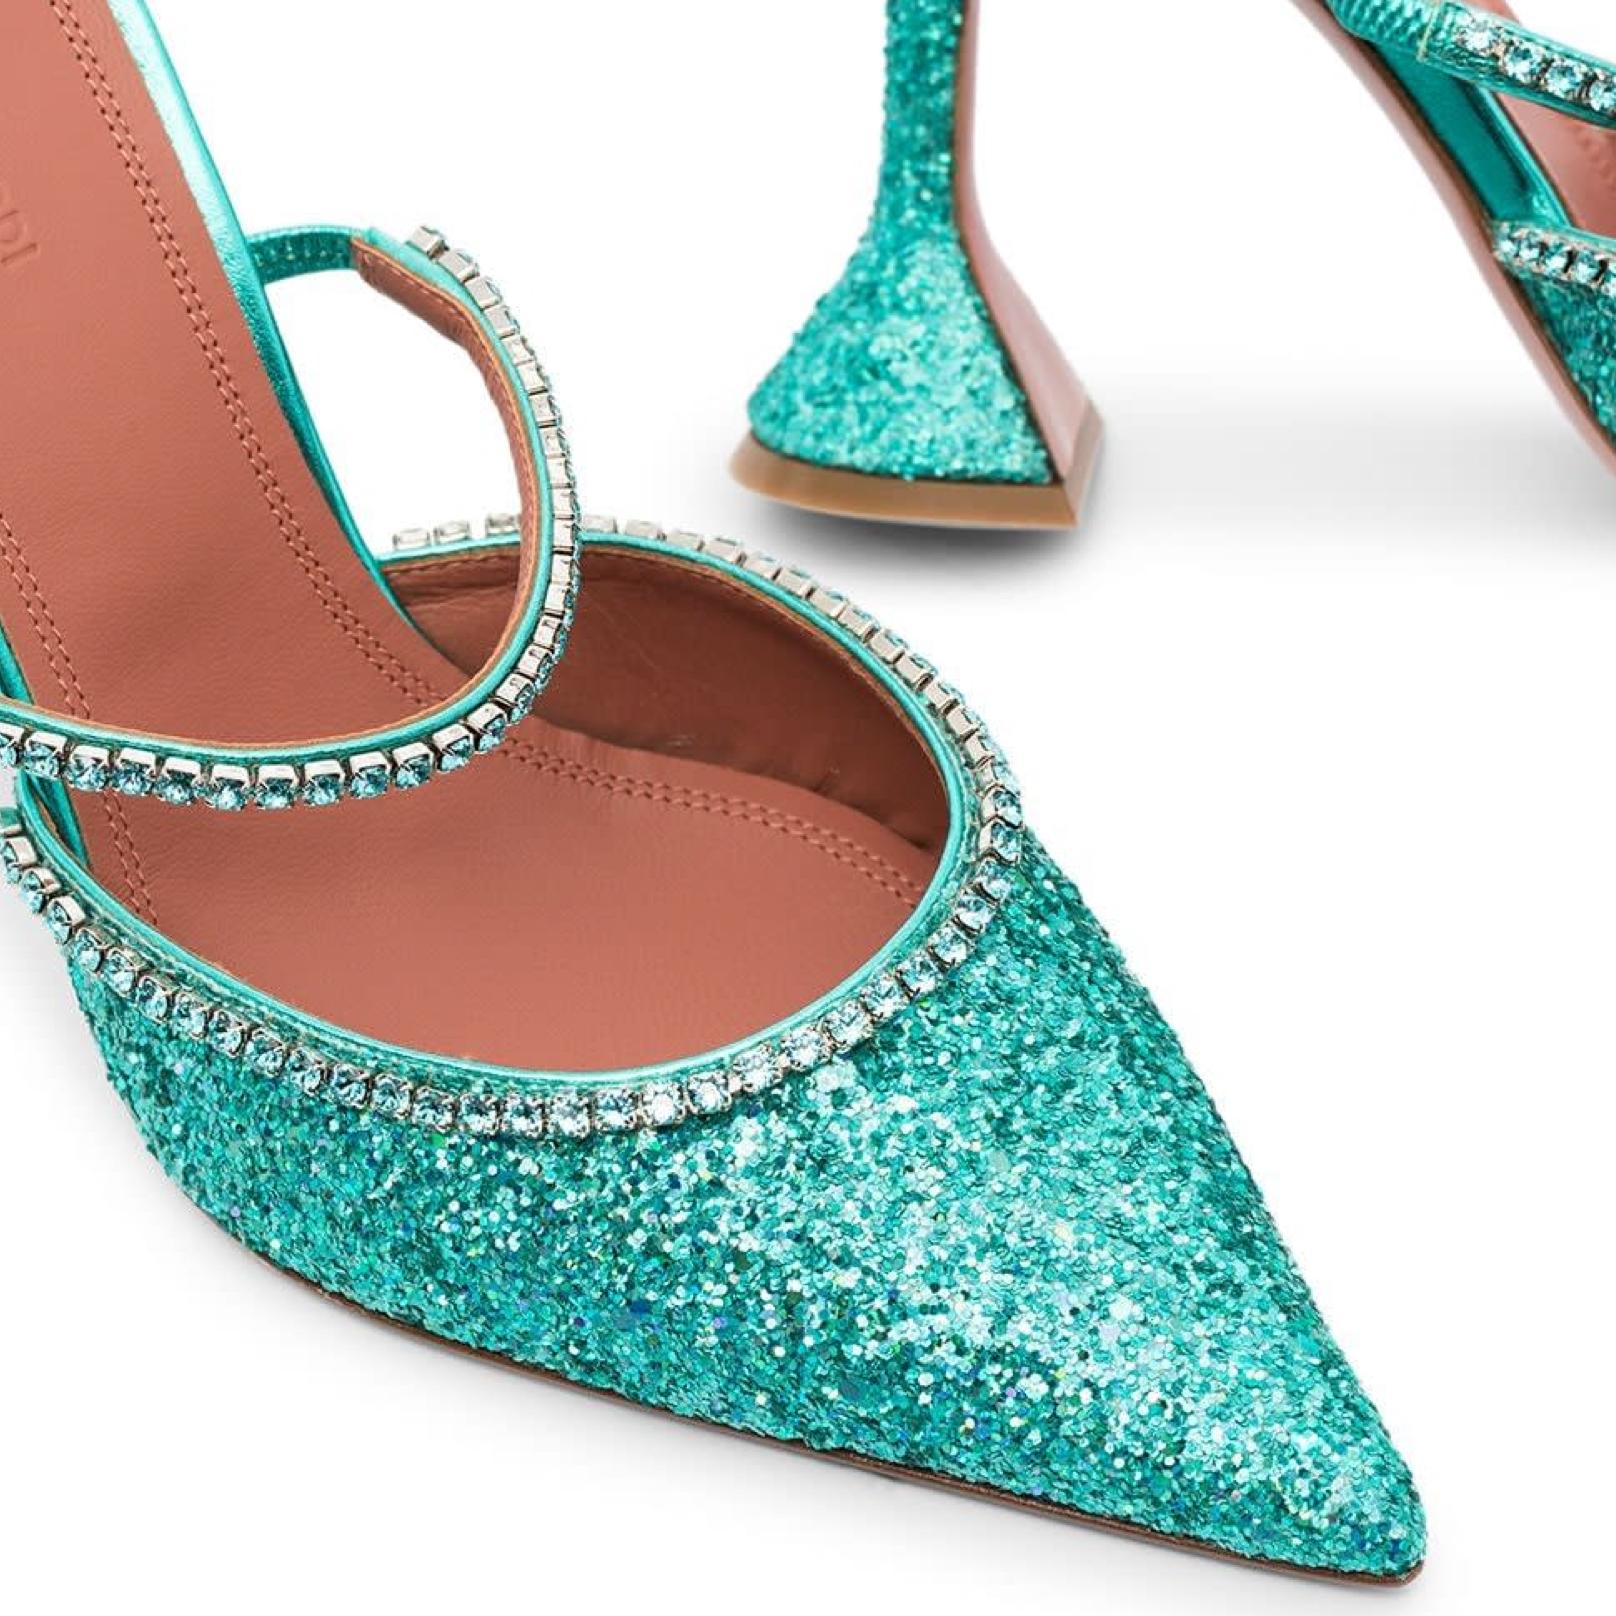 These Amina Muaddi Gilda 95 glitter mules in Mermaid color pointed toes, crystal trims to the vamp and straps, and 95 mm heels with sculpted bases. SS20
Style ID: 14770256 / GILDAMULEGLITTER

COLOR: Mermaid (blueish green)
MATERIALS: Leather, PVC,